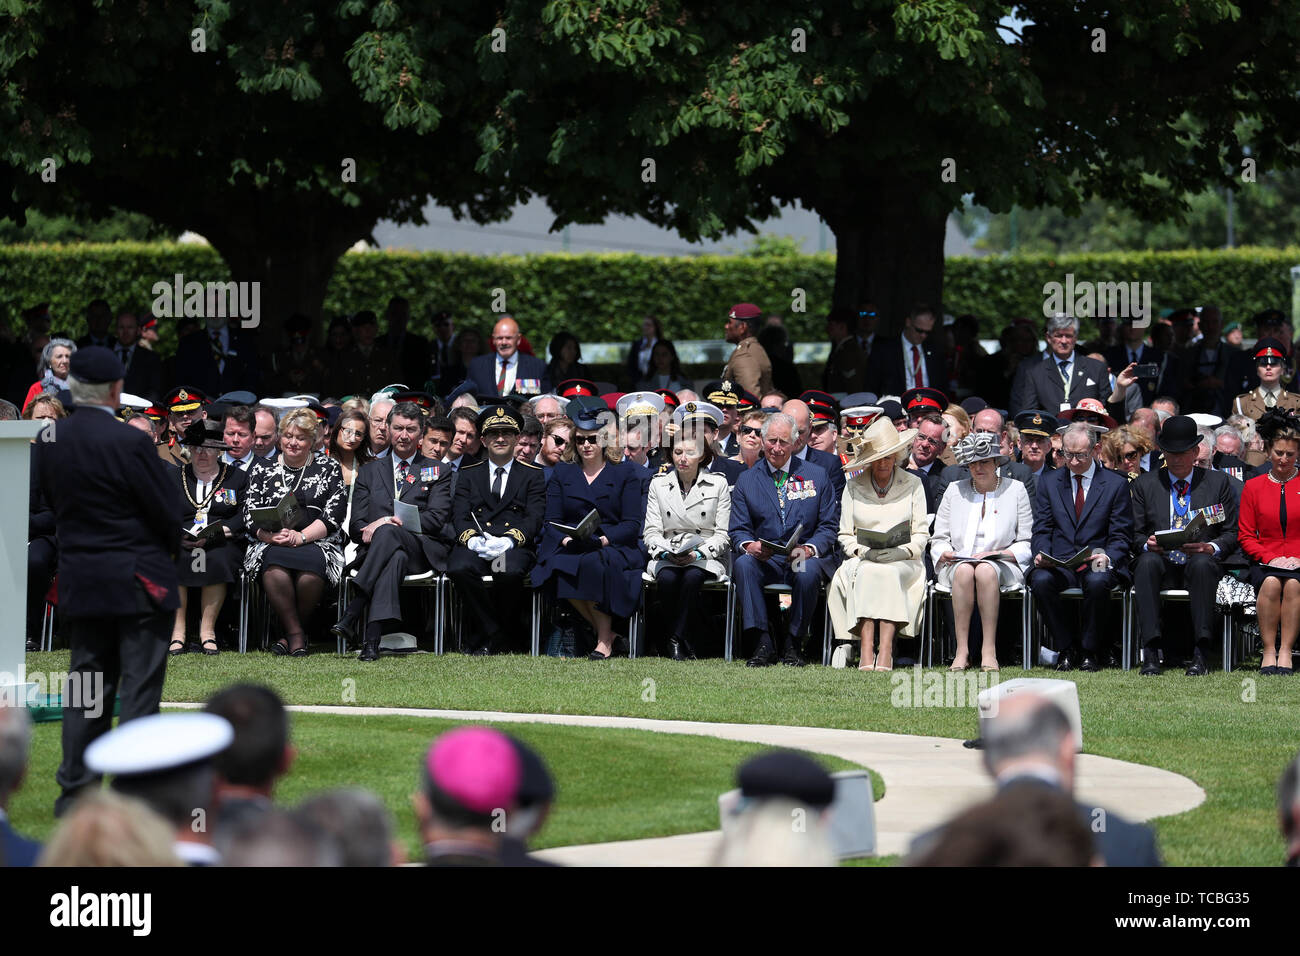 The Prince of Wales and the Duchess of Cornwall listen to veteran Frank Baugh (left), who served as a signalman with the Royal Navy on a landing craft during D-Day during the Royal British Legion's Service of Remembrance, at the Commonwealth War Graves Commission Cemetery, in Bayeux, France, as part of commemorations for the 75th anniversary of the D-Day landings. Stock Photo